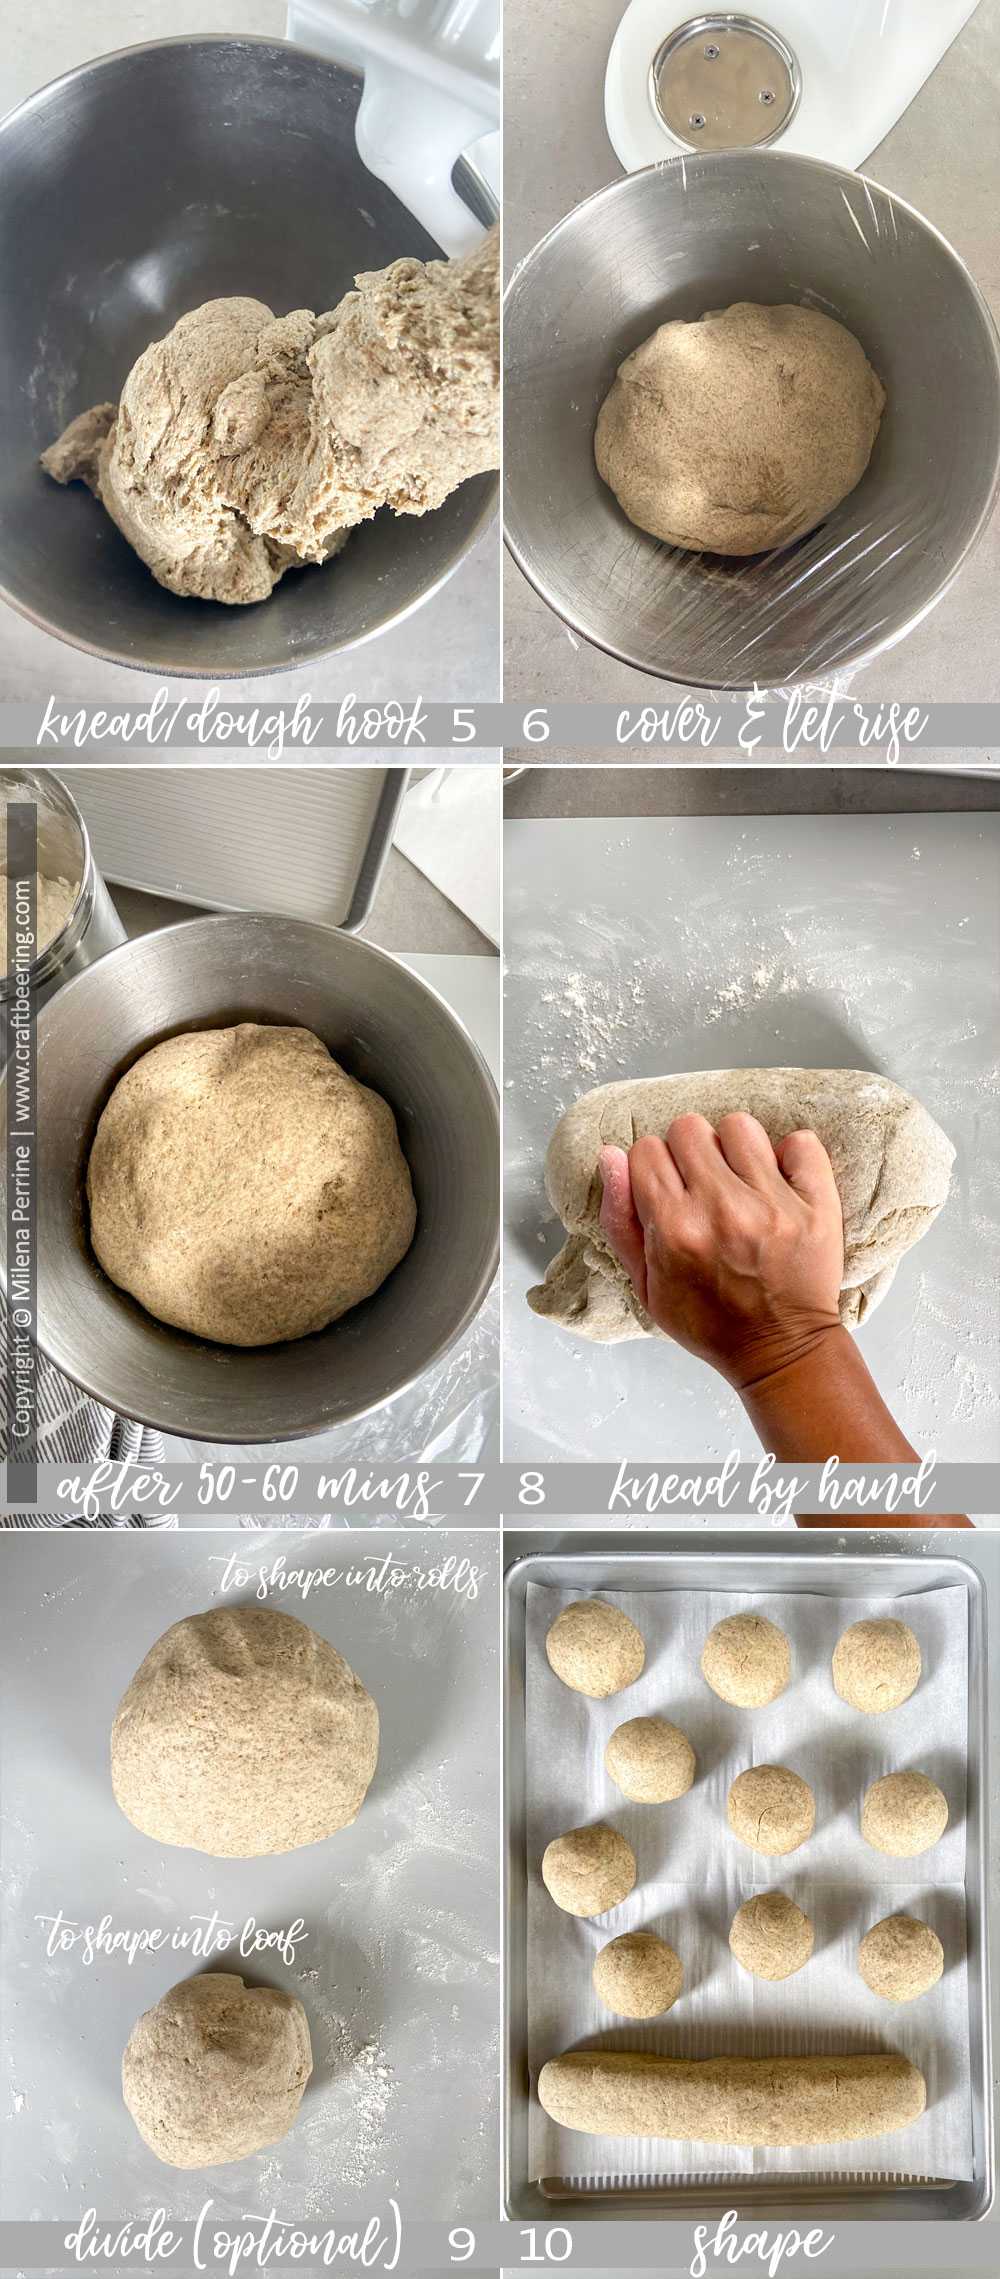 How to make beer bread with rye flour